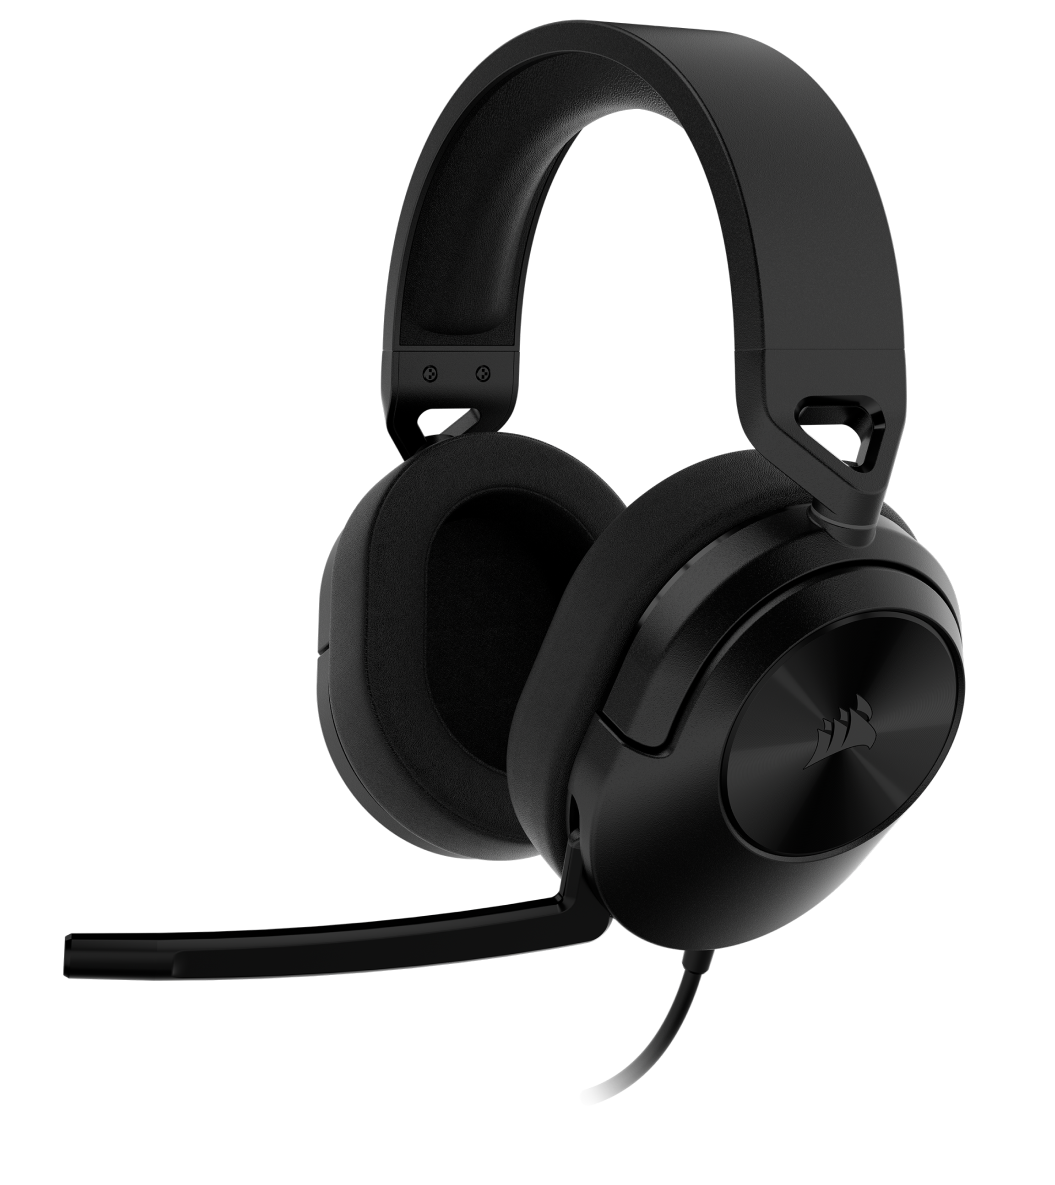 https://cwsmgmt.corsair.com/pdp/headsets/hs55-stereo/assets/images/hs55-headset-black.png